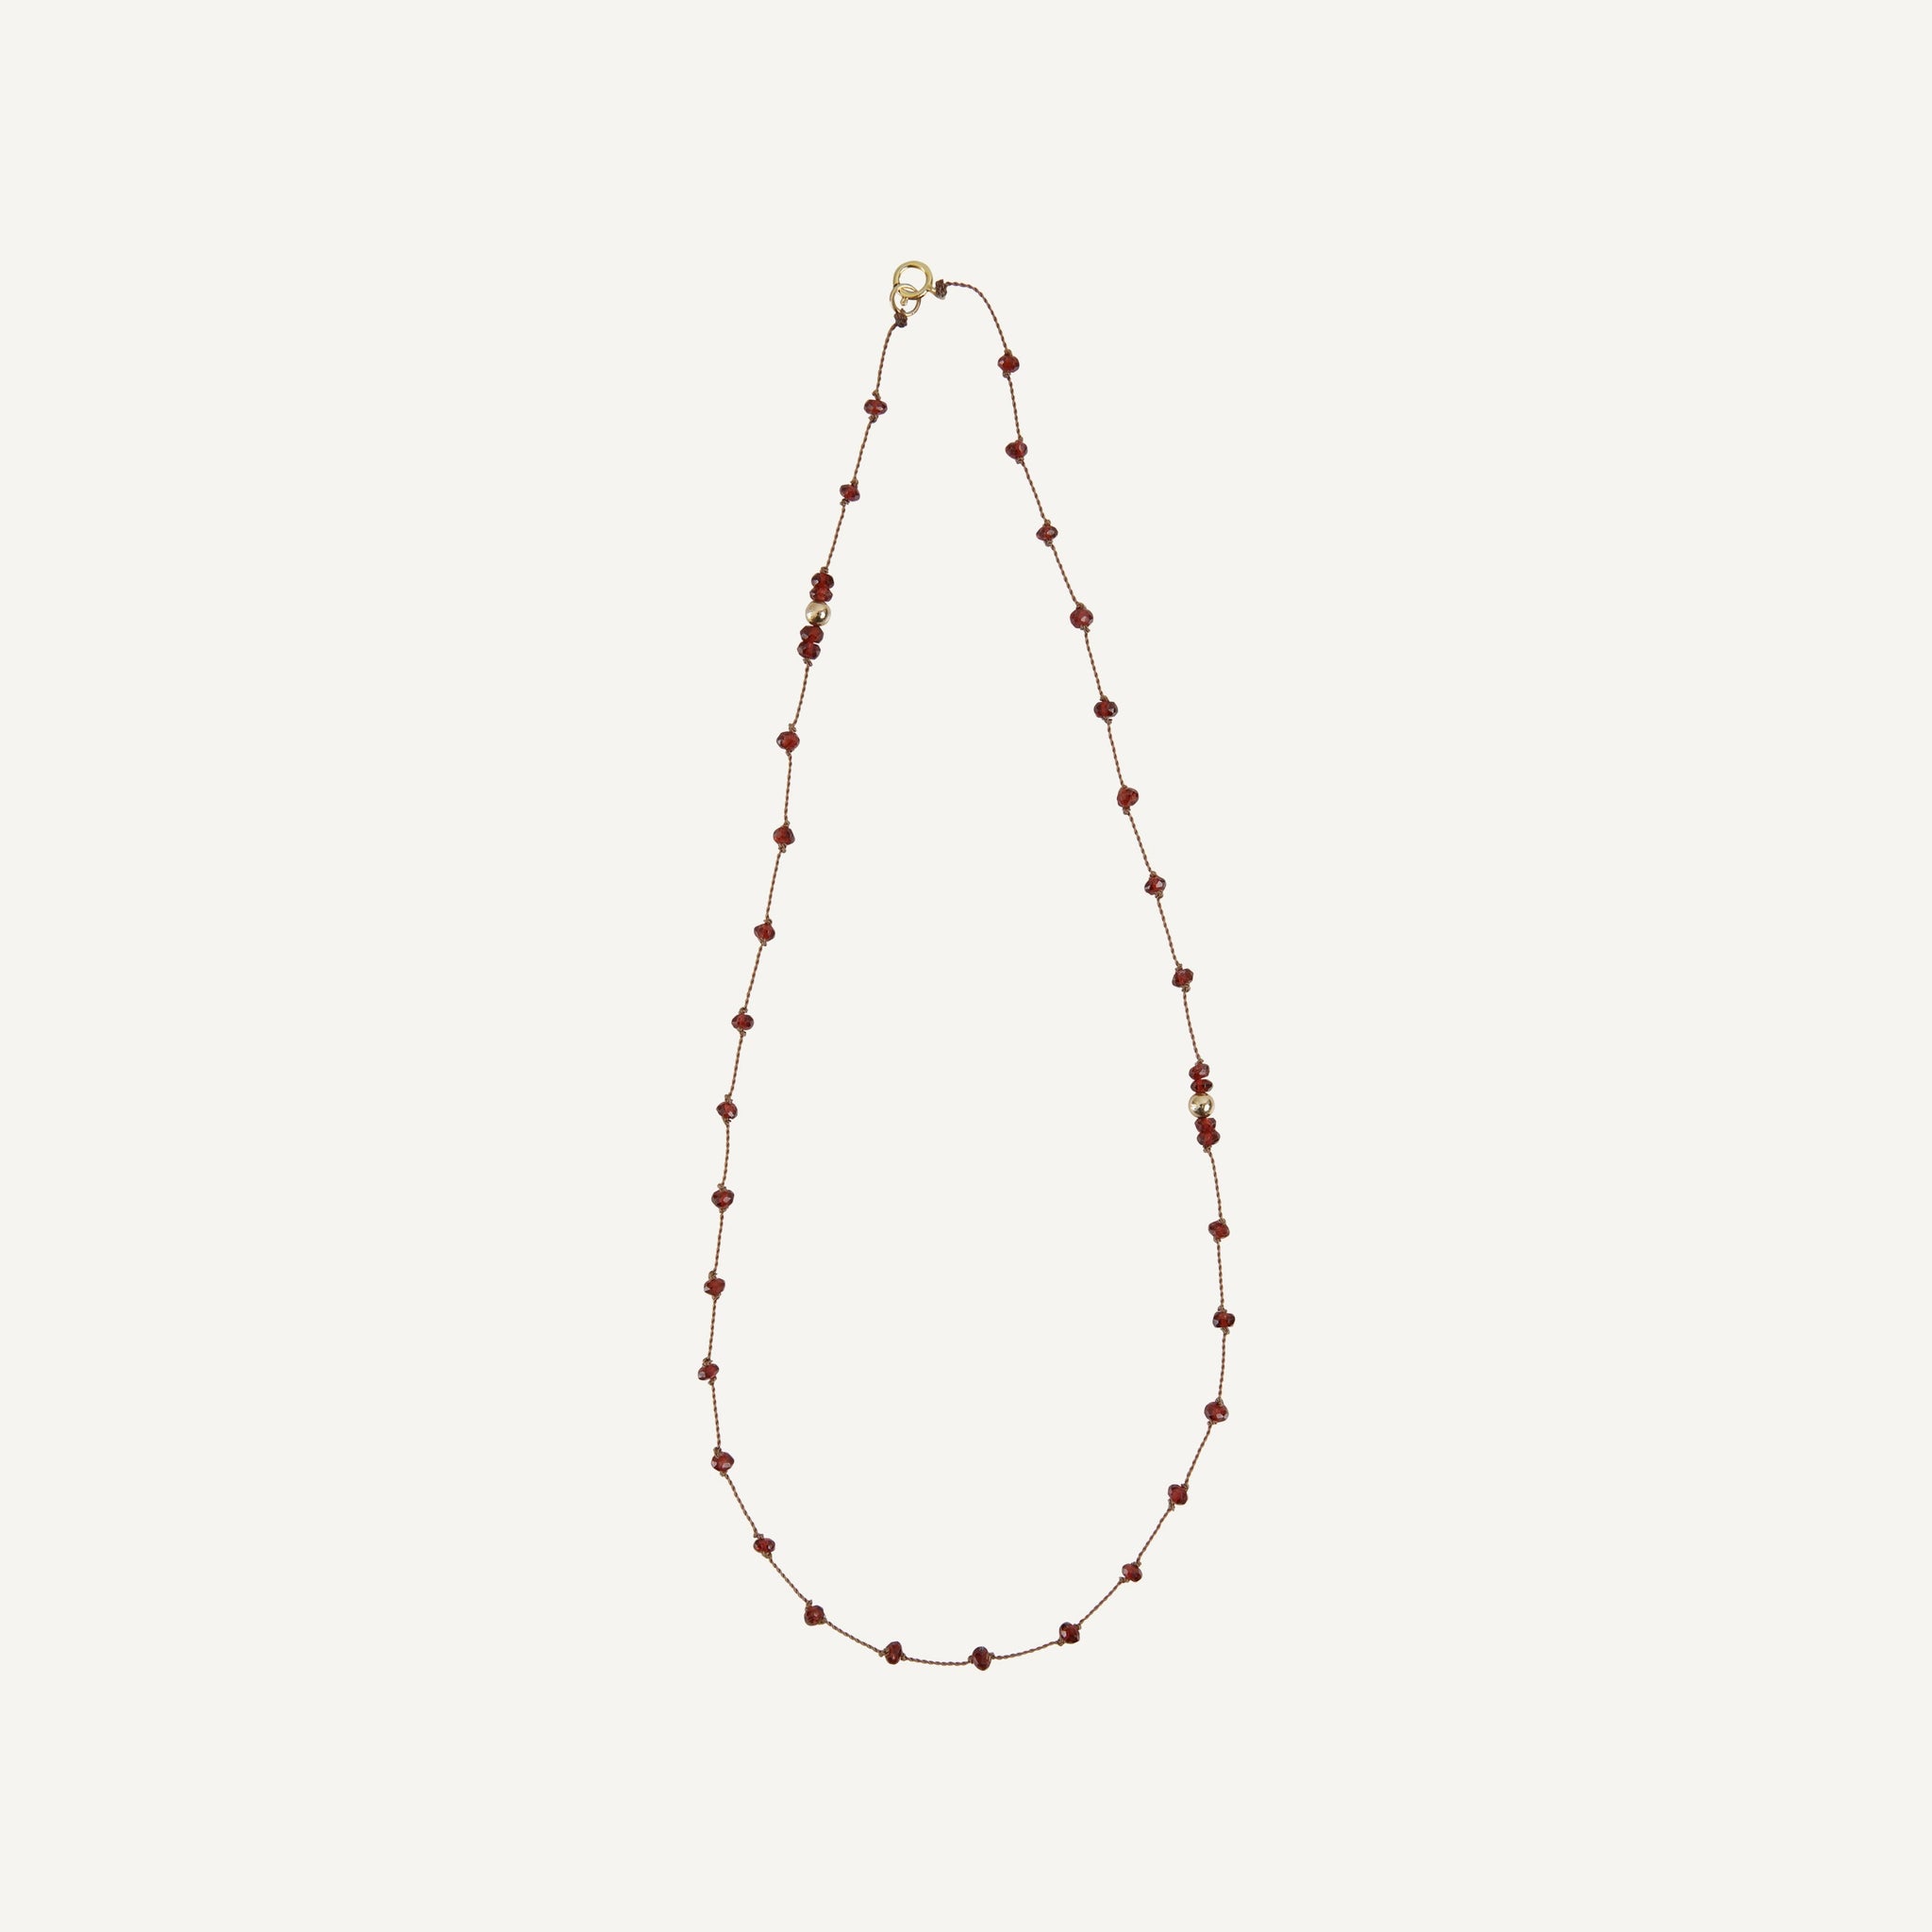 GARNET AND GOLD BEAD NECKLACE